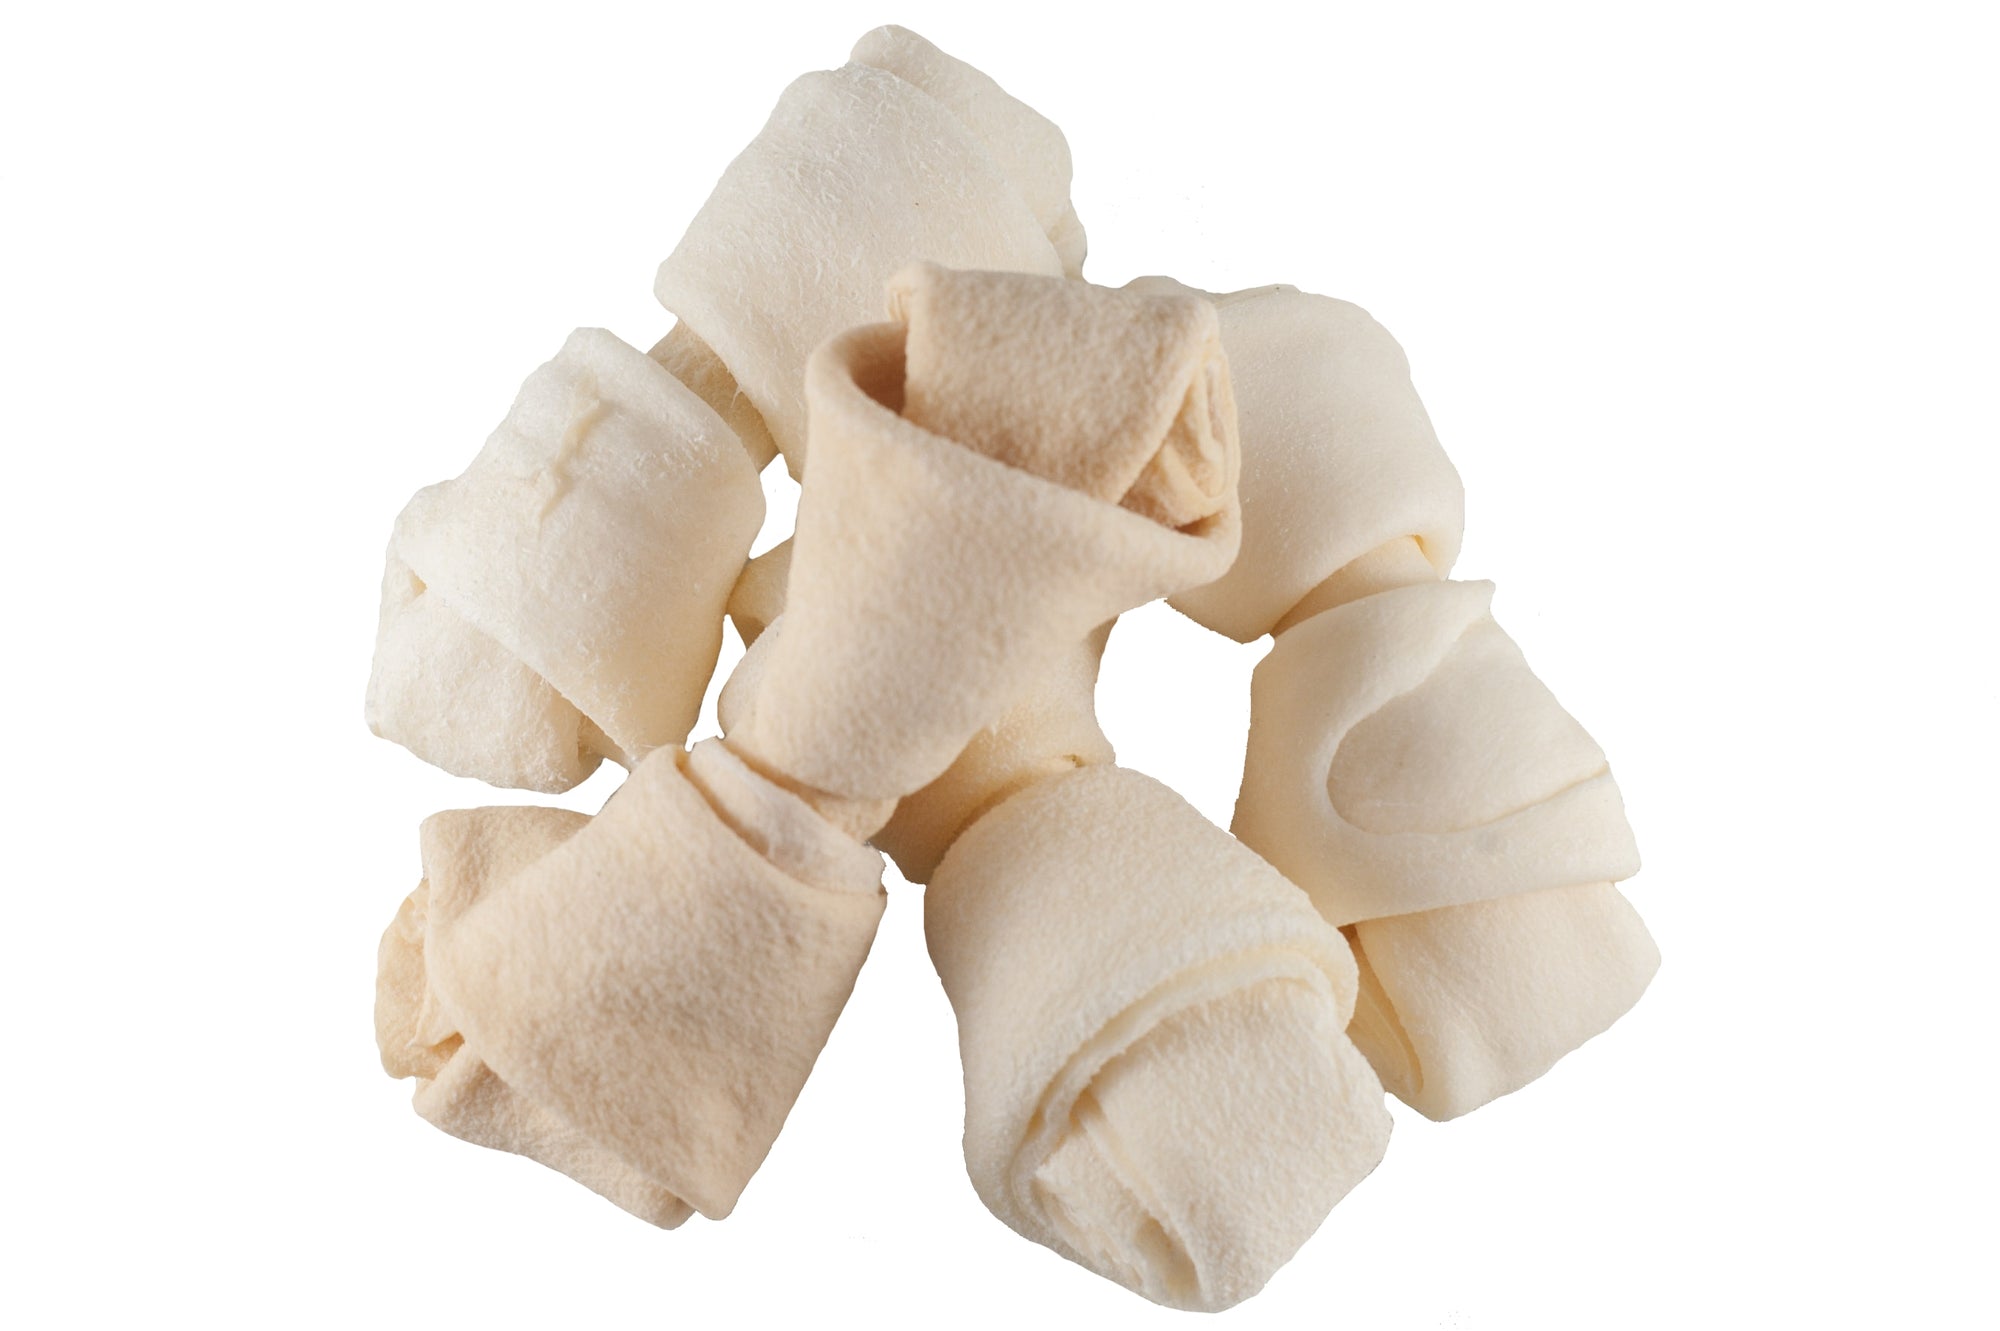 Dog Rawhide Chews Bones for Small Dogs 2-3" Inches (50 Count) 100% Natural USA Made from Natural Grass Fed Cattle | Premium Raw Hides Bulk Treats